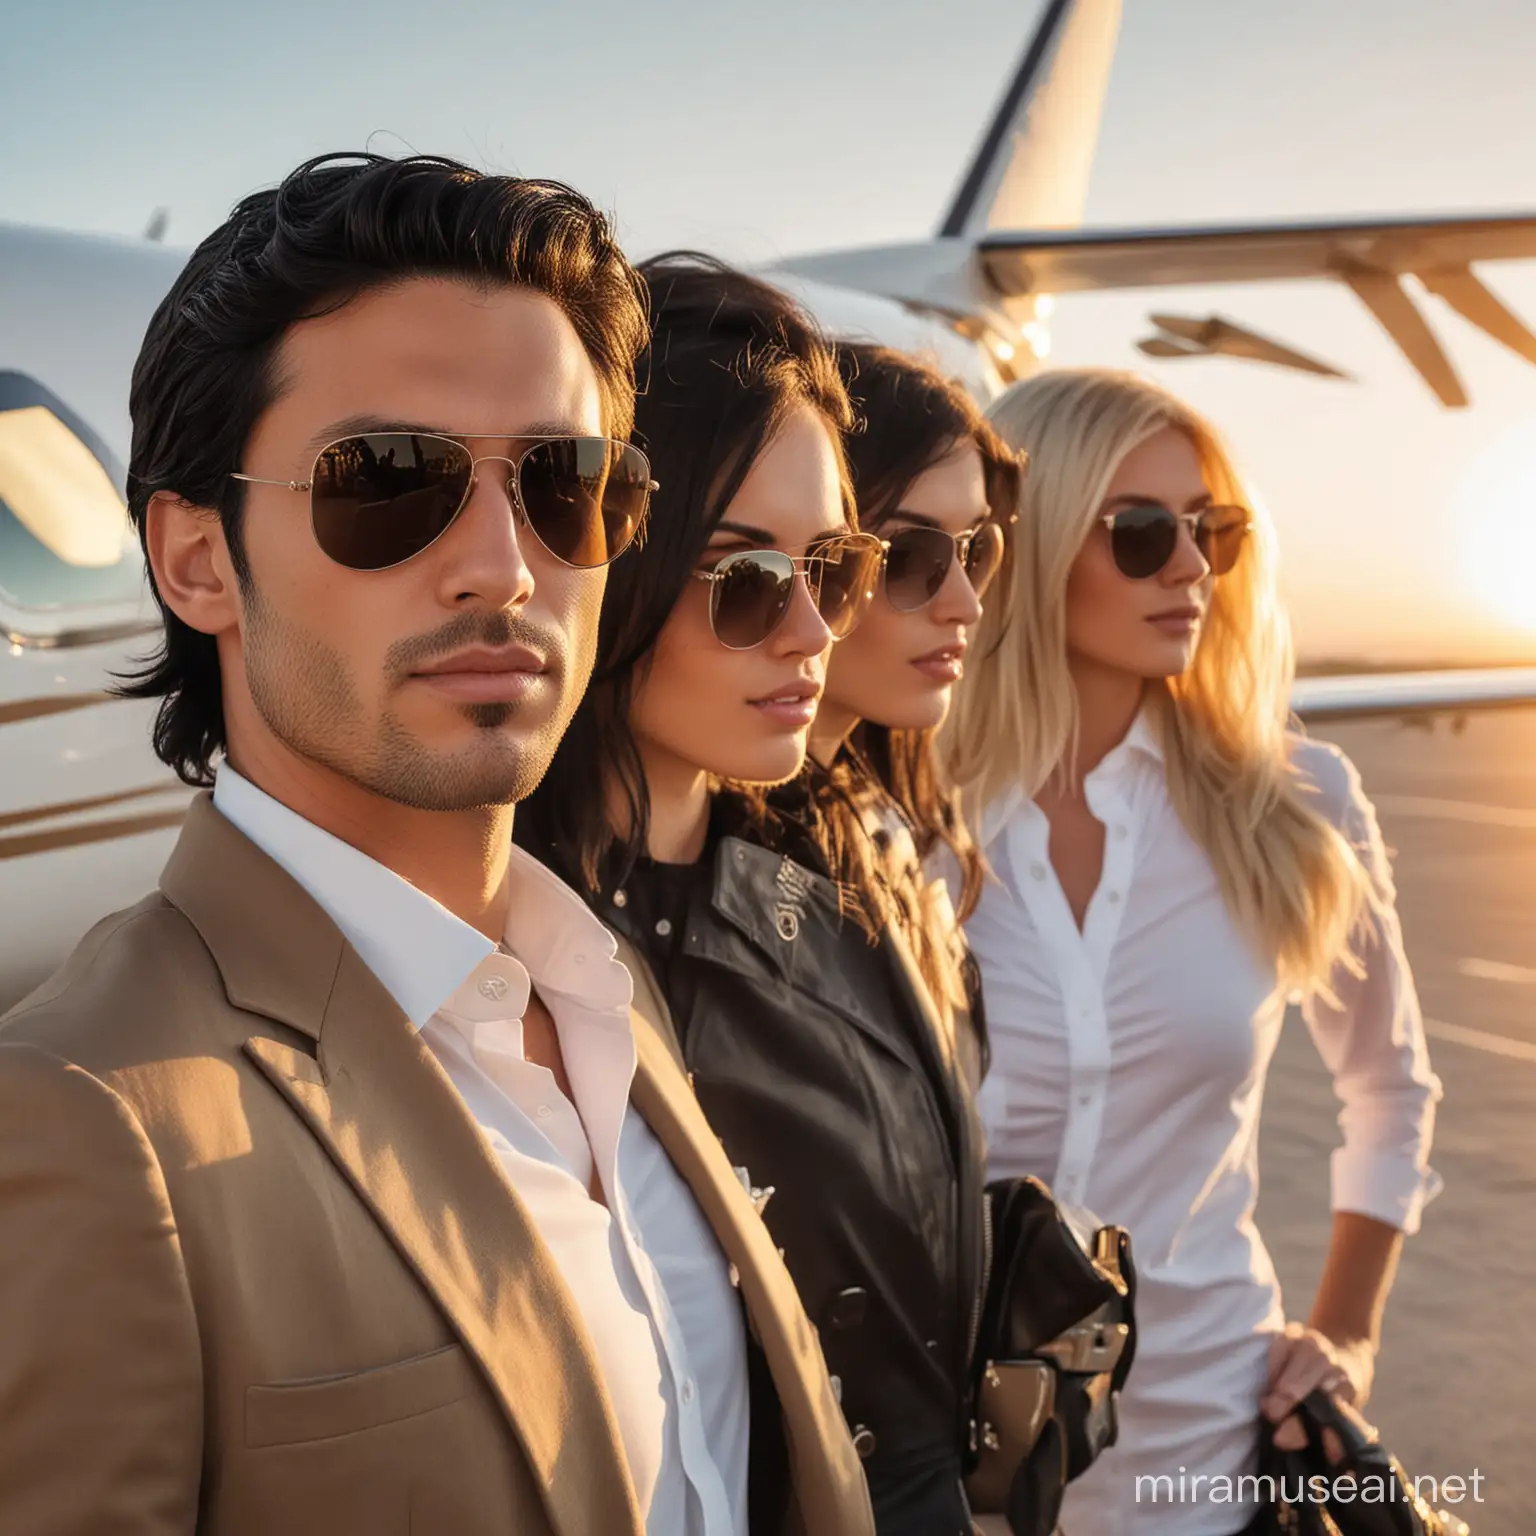 Handsome man with black hair, stubble and sunglasses. Behind him are two blonde girls in a state of luxury, on a luxurious private plane, at sunset. I want to enlarge the man.